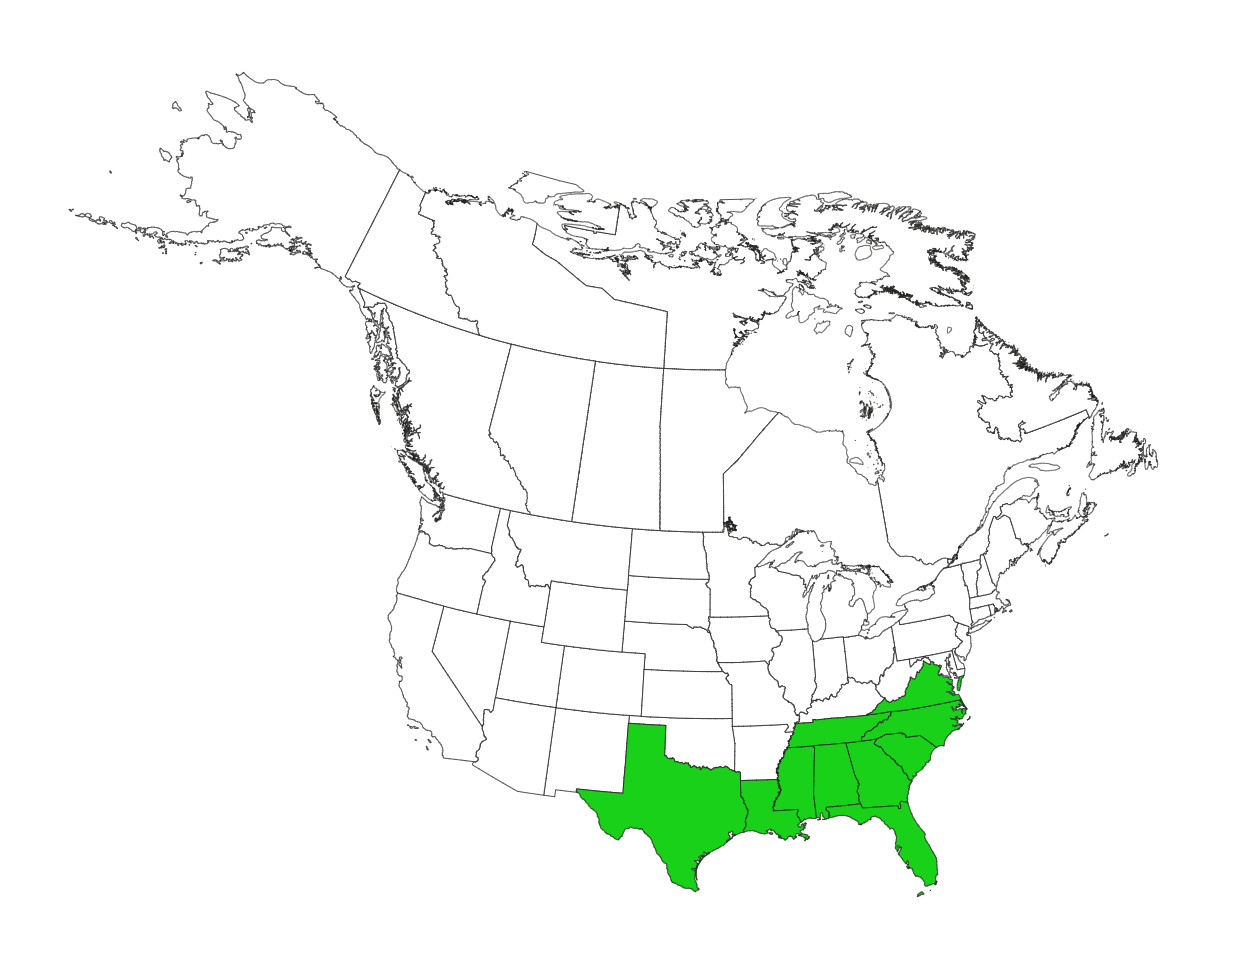 A map of the United States and Canada (excluding Hawaii). Several states in the Southeastern US are colored neon green to show the distribution of cogongrass, while the others are white. The green states are Texas, Louisiana, Mississippi, Alabama, Georgia, Florida, Tennessee, South Carolina, North Carolina, and Virginia.